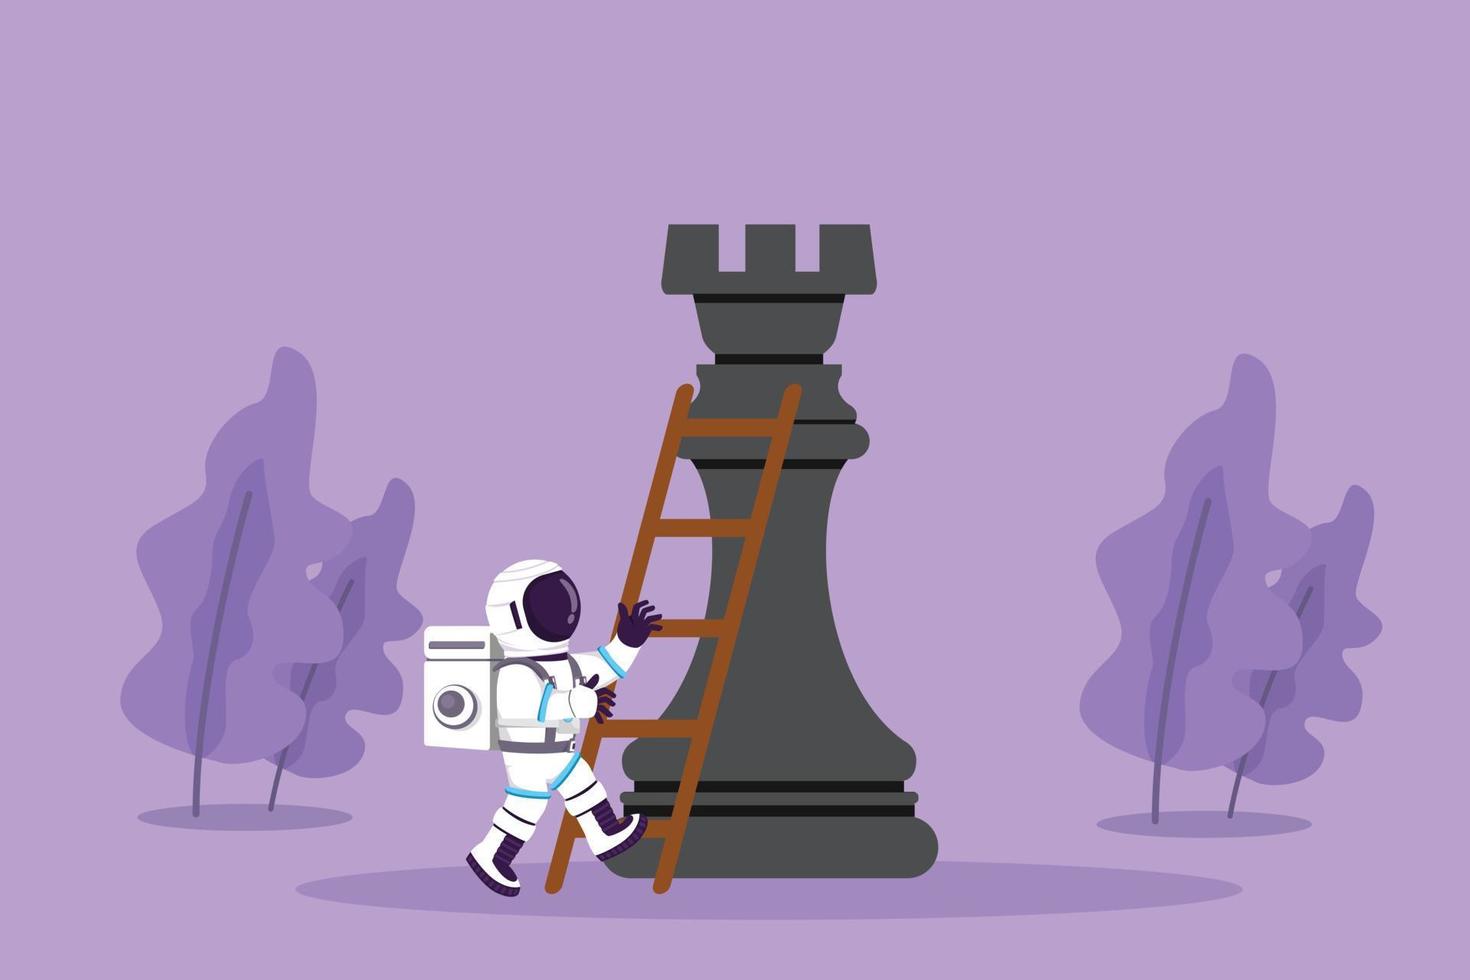 Cartoon flat style drawing young astronaut climb huge rook chess piece with ladder in moon surface. Strategic or smart move competition. Cosmic galaxy space concept. Graphic design vector illustration